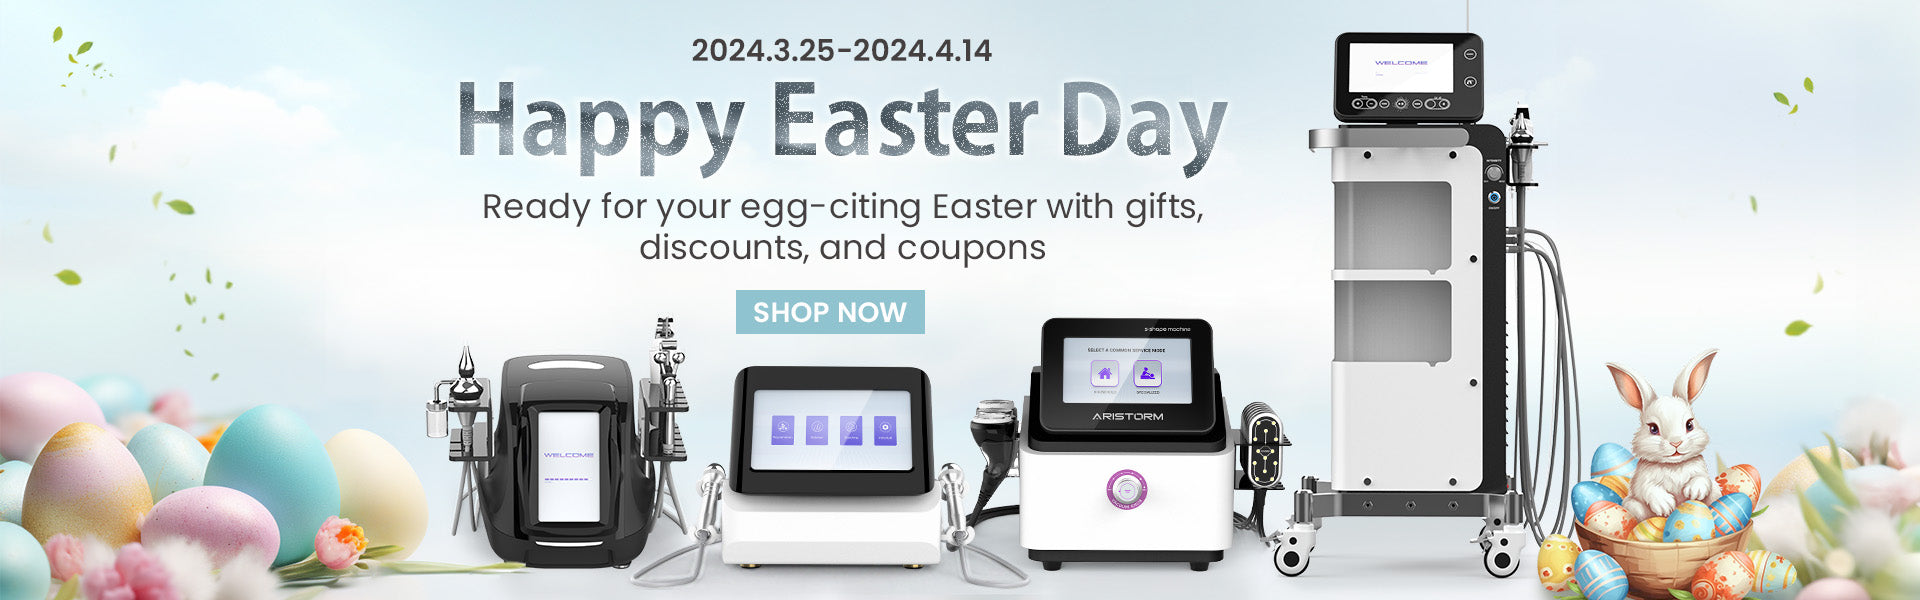 2024 easter sale